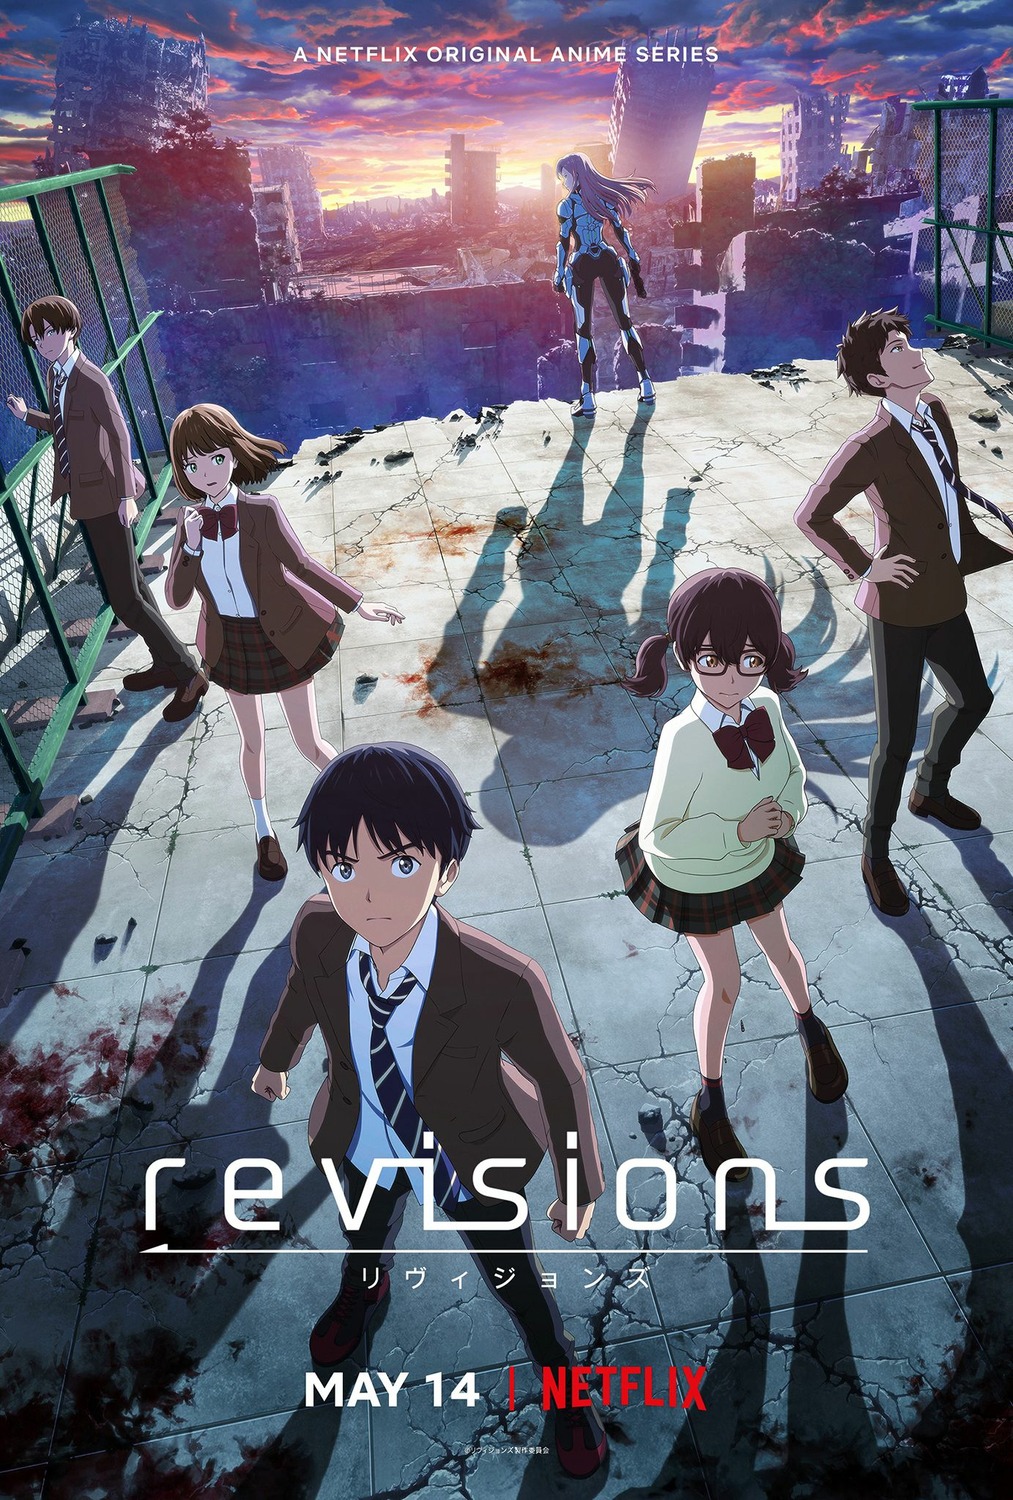 Extra Large TV Poster Image for Revisions 